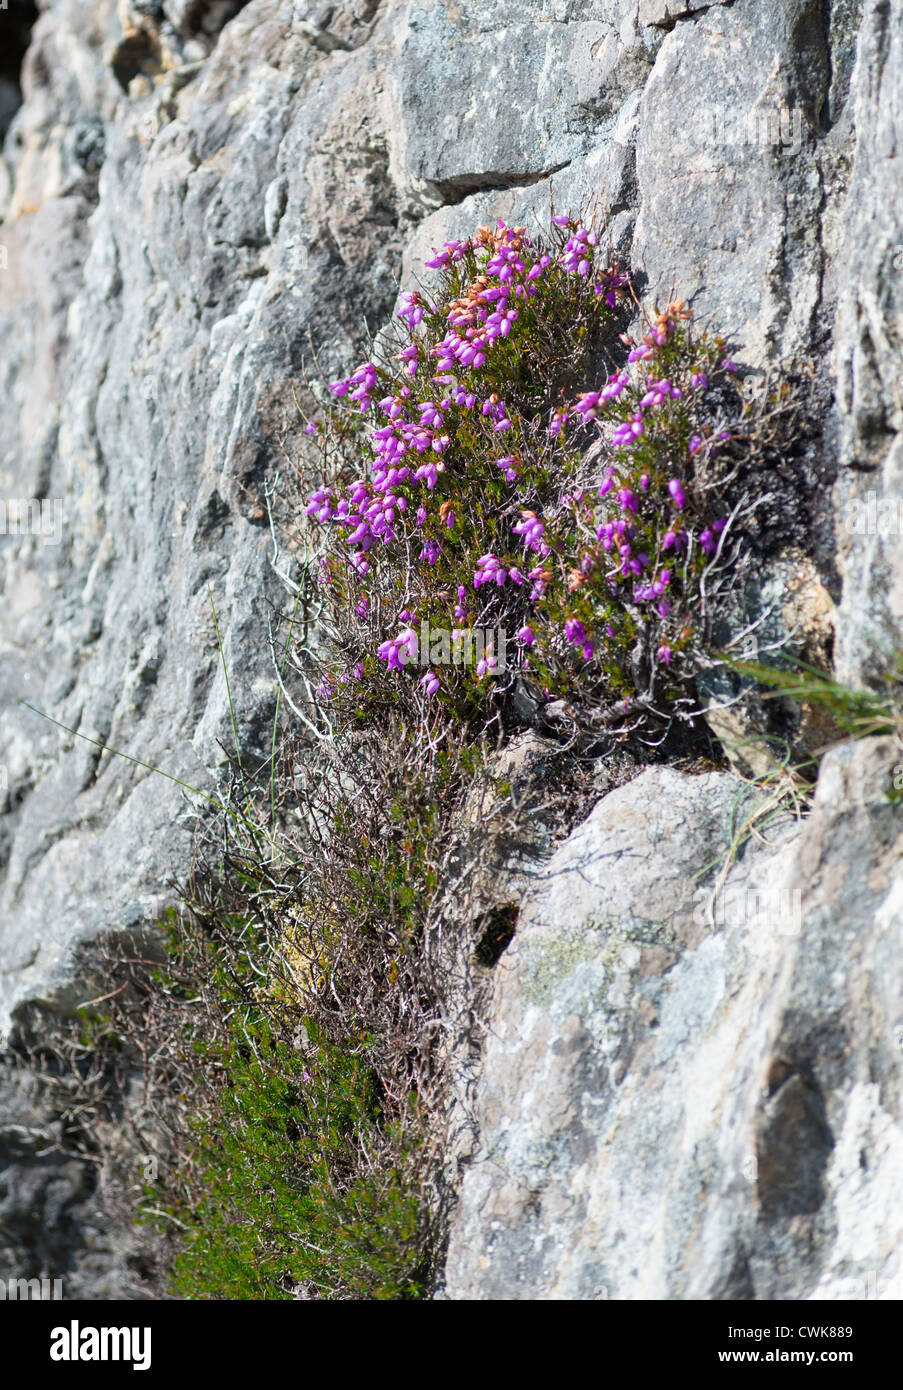 Wild thyme (Thymus alpigenus) growing in the rocks of Slieve League cliffs, County Donegal, Ireland. Stock Photo